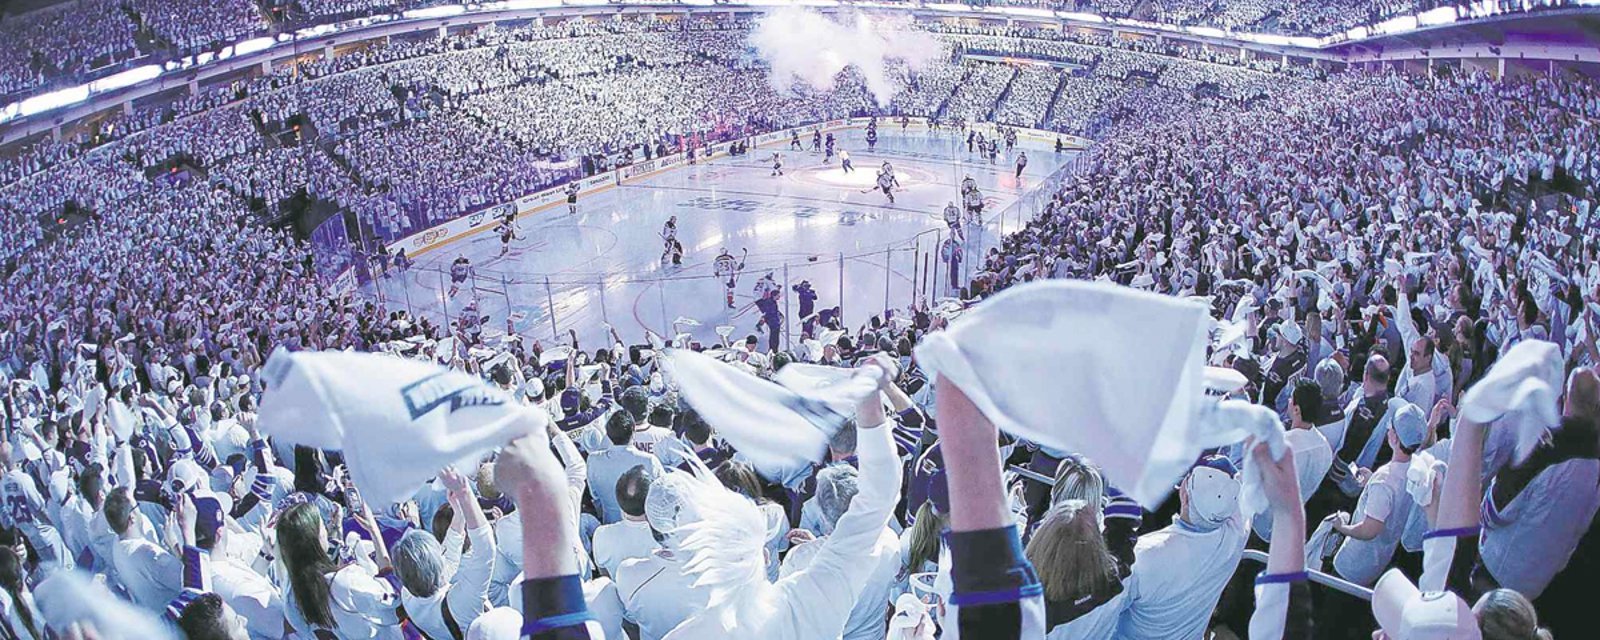 Winnipeg advocacy group calls for change to Whiteout Party name